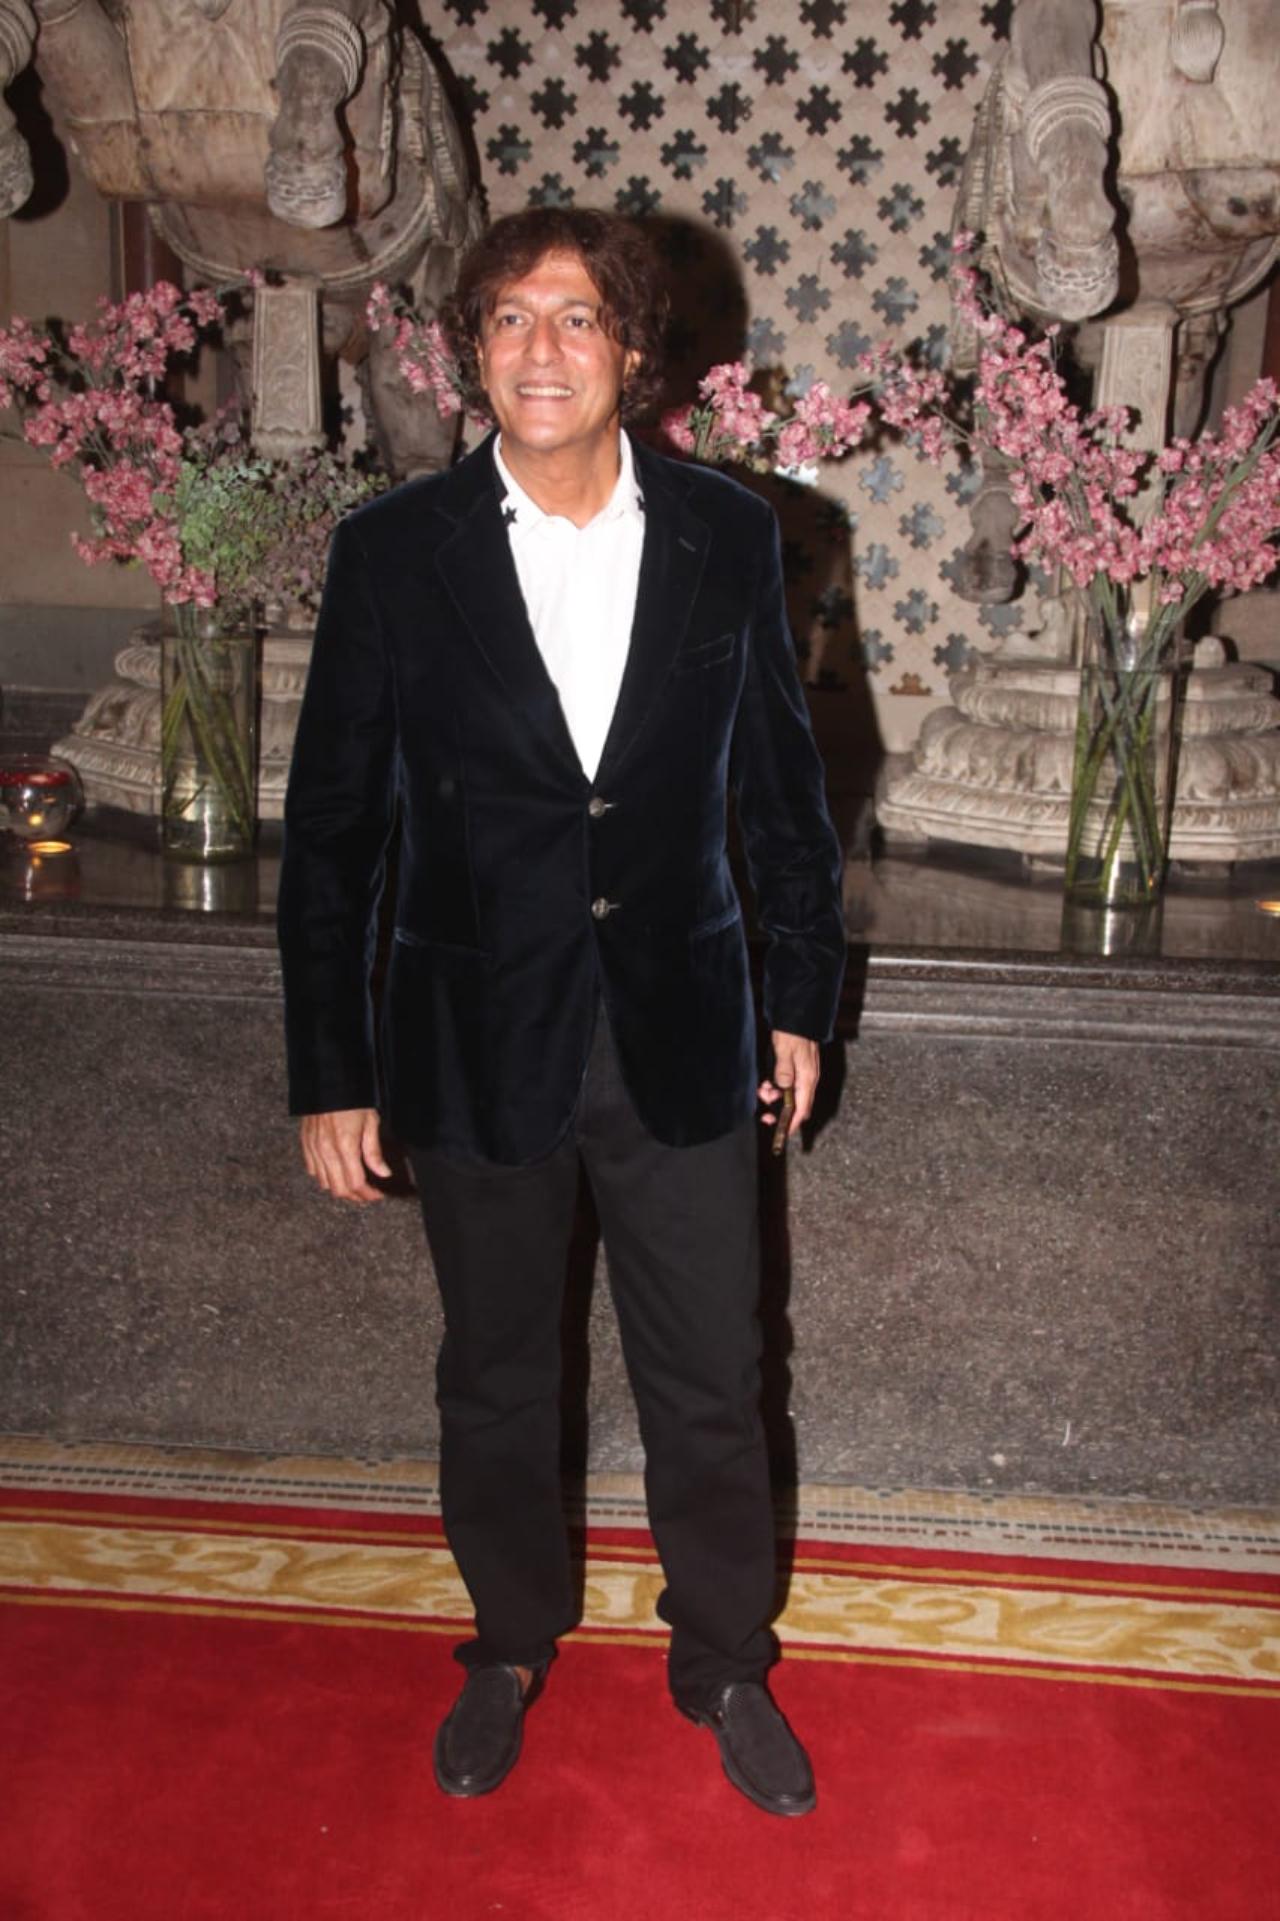 Chunky Panday was all smiles as he got clicked by the paps. He kept it simple in a black suit for the function